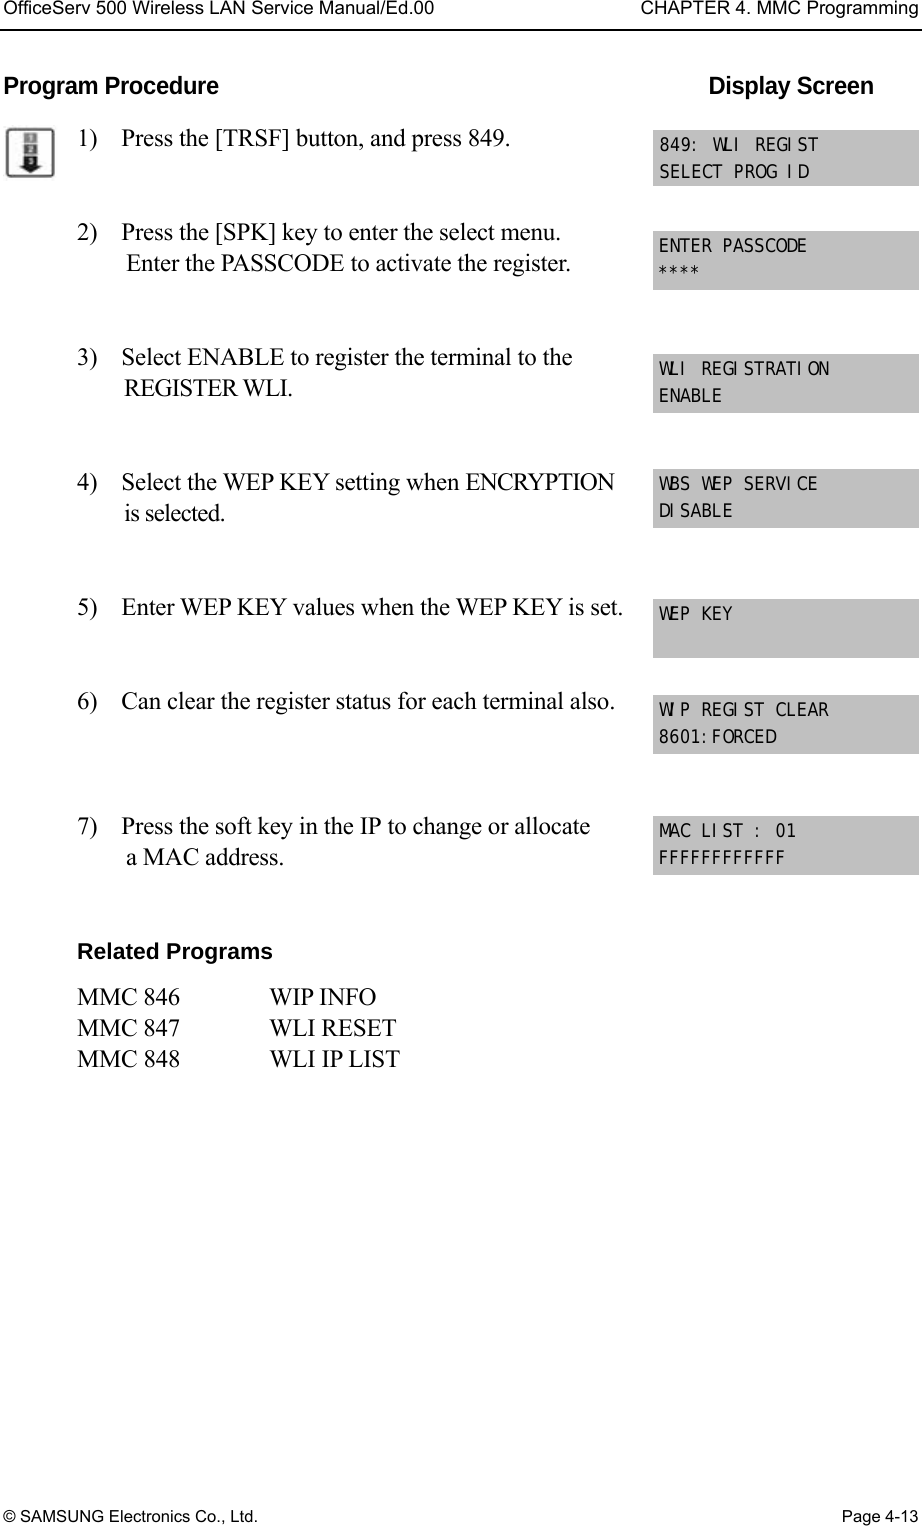 OfficeServ 500 Wireless LAN Service Manual/Ed.00  CHAPTER 4. MMC Programming © SAMSUNG Electronics Co., Ltd.  Page 4-13 Program Procedure                                            Display Screen 1)    Press the [TRSF] button, and press 849.   2)    Press the [SPK] key to enter the select menu.   Enter the PASSCODE to activate the register.   3)    Select ENABLE to register the terminal to the   REGISTER WLI.     4)    Select the WEP KEY setting when ENCRYPTION   is selected.   5)    Enter WEP KEY values when the WEP KEY is set.     6)    Can clear the register status for each terminal also.    7)    Press the soft key in the IP to change or allocate   a MAC address.     Related Programs MMC 846       WIP INFO    MMC 847   WLI RESET   MMC 848   WLI IP LIST   ENTER PASSCODE **** 849: WLI REGIST SELECT PROG ID WLI REGISTRATION ENABLE WBS WEP SERVICE  DISABLE WEP KEY WIP REGIST CLEAR 8601:FORCED MAC LIST : 01 FFFFFFFFFFFF 